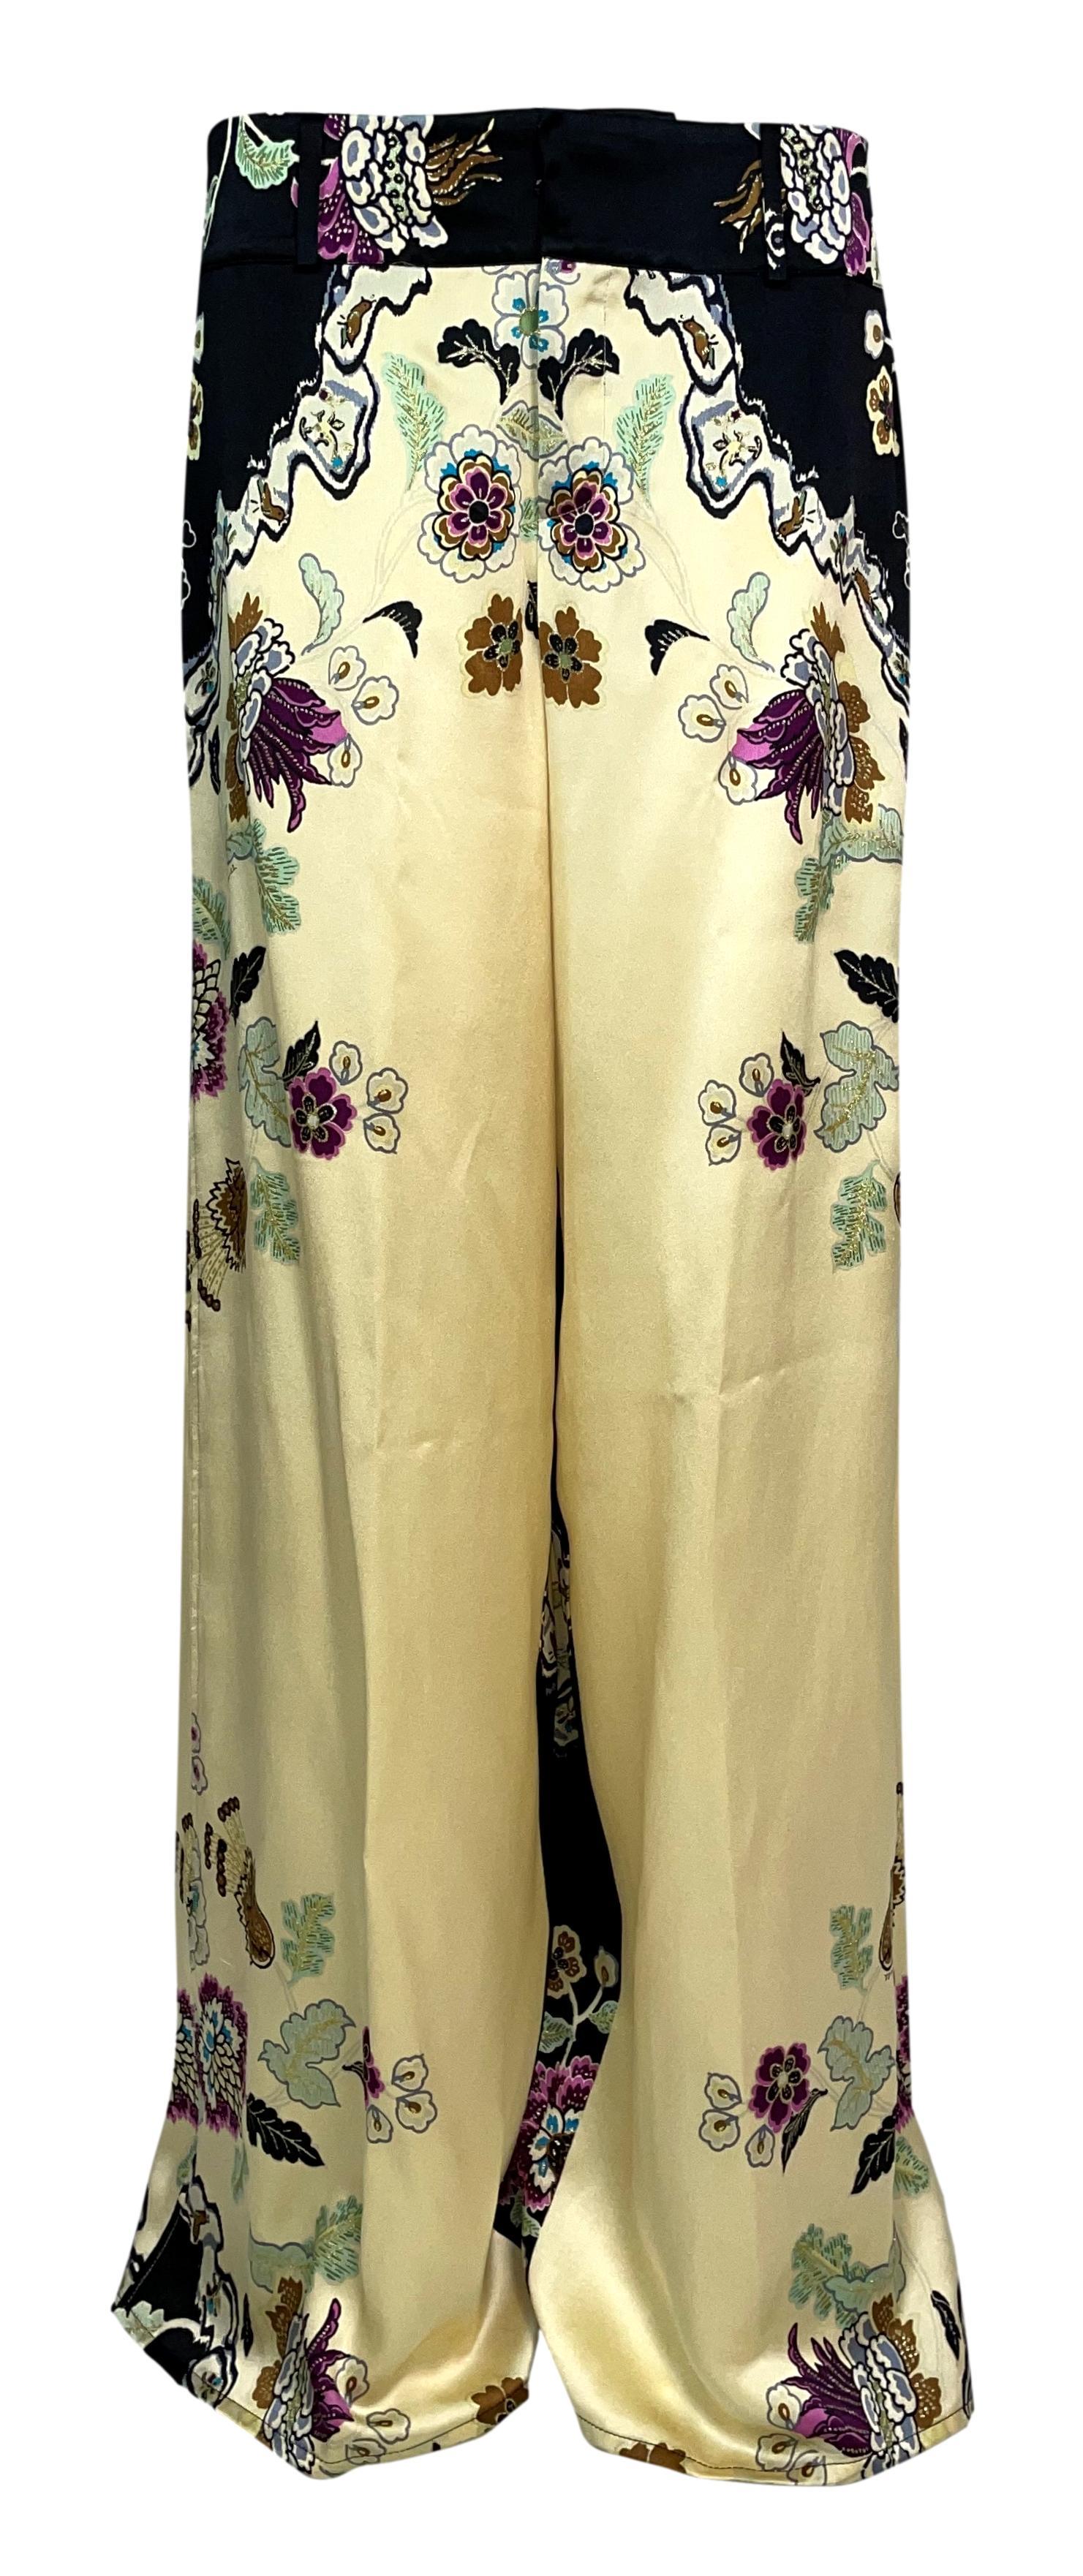 **THANK YOU FOR SHOPPING WITH MES DEUX FILLES**

DESIGNER: S/S 2003 Roberto Cavalli
CONDITION: Excellent
FABRIC: Silk
COUNTRY MADE: Italy
SIZE: M
MEASUREMENTS; provided as a courtesy, not a guarantee of fit:
Waist: 31